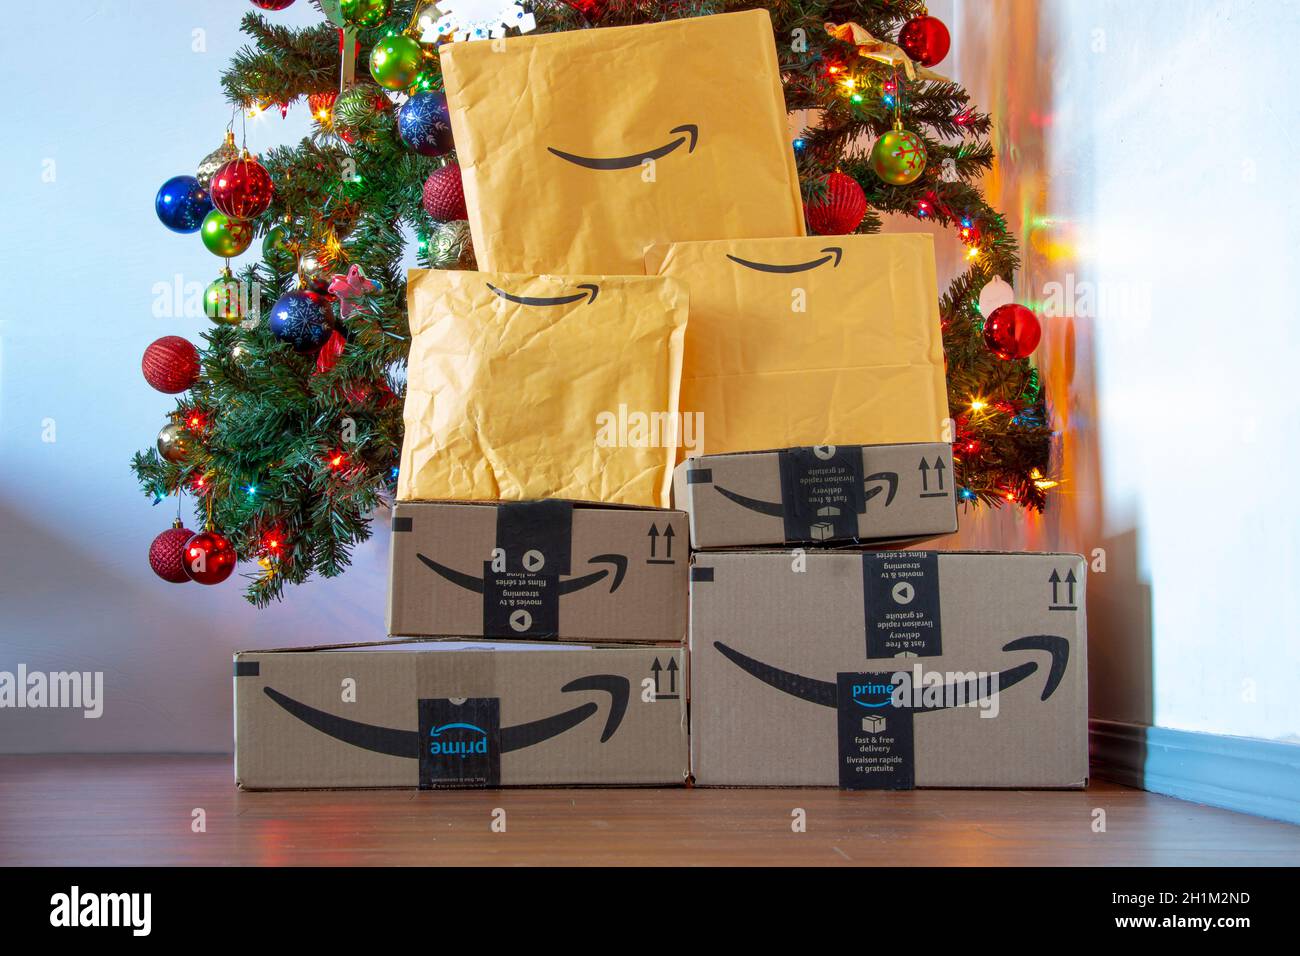 Calgary, Alberta, Canada. Nov. 16, 2020. Amazon boxes and envelopes under a Christmas tree with ornaments and lights on. Concept: Delivering packages Stock Photo